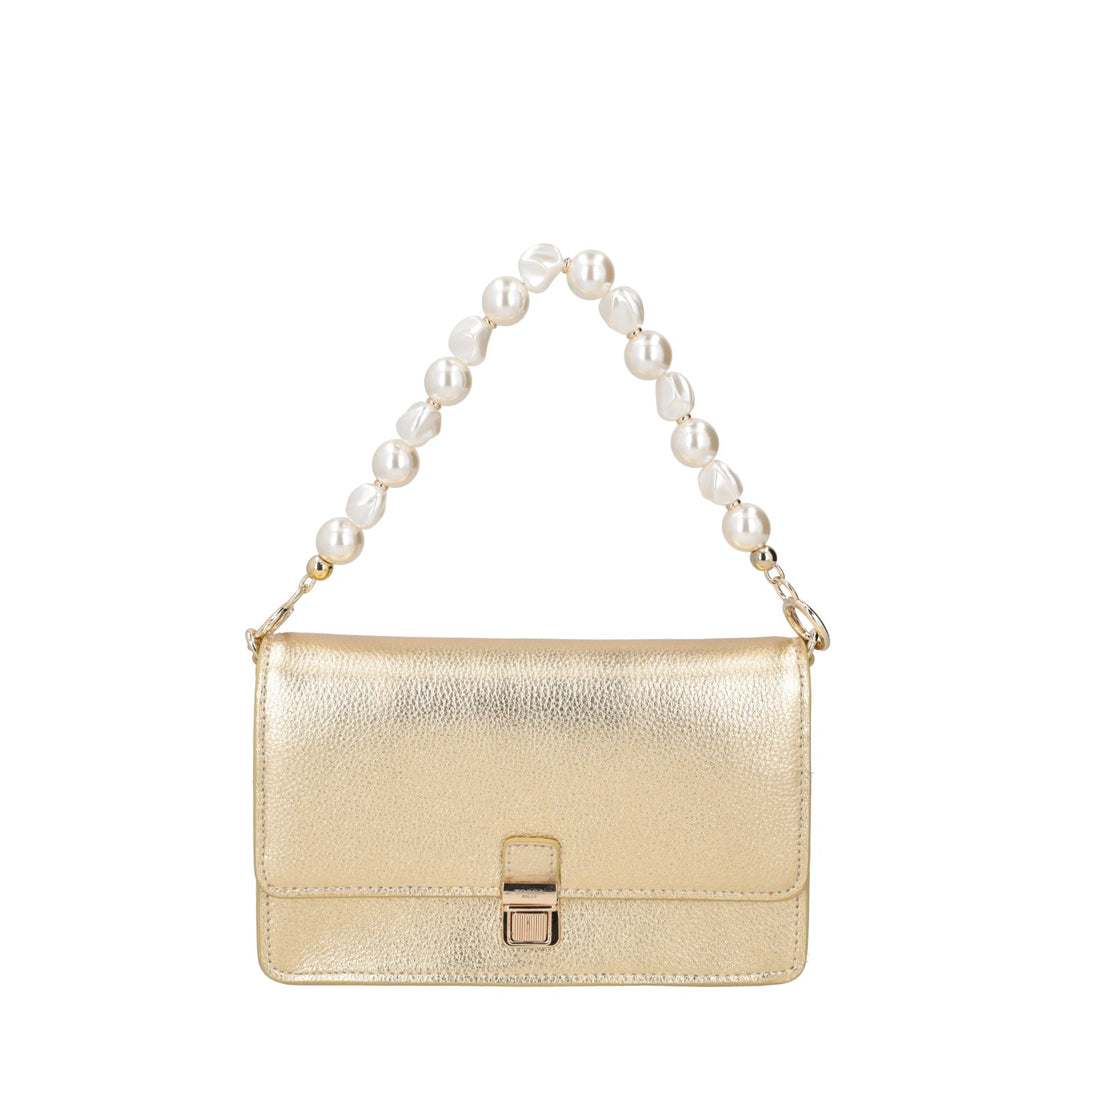 GOLD GIN TONIC LEATHER BAG